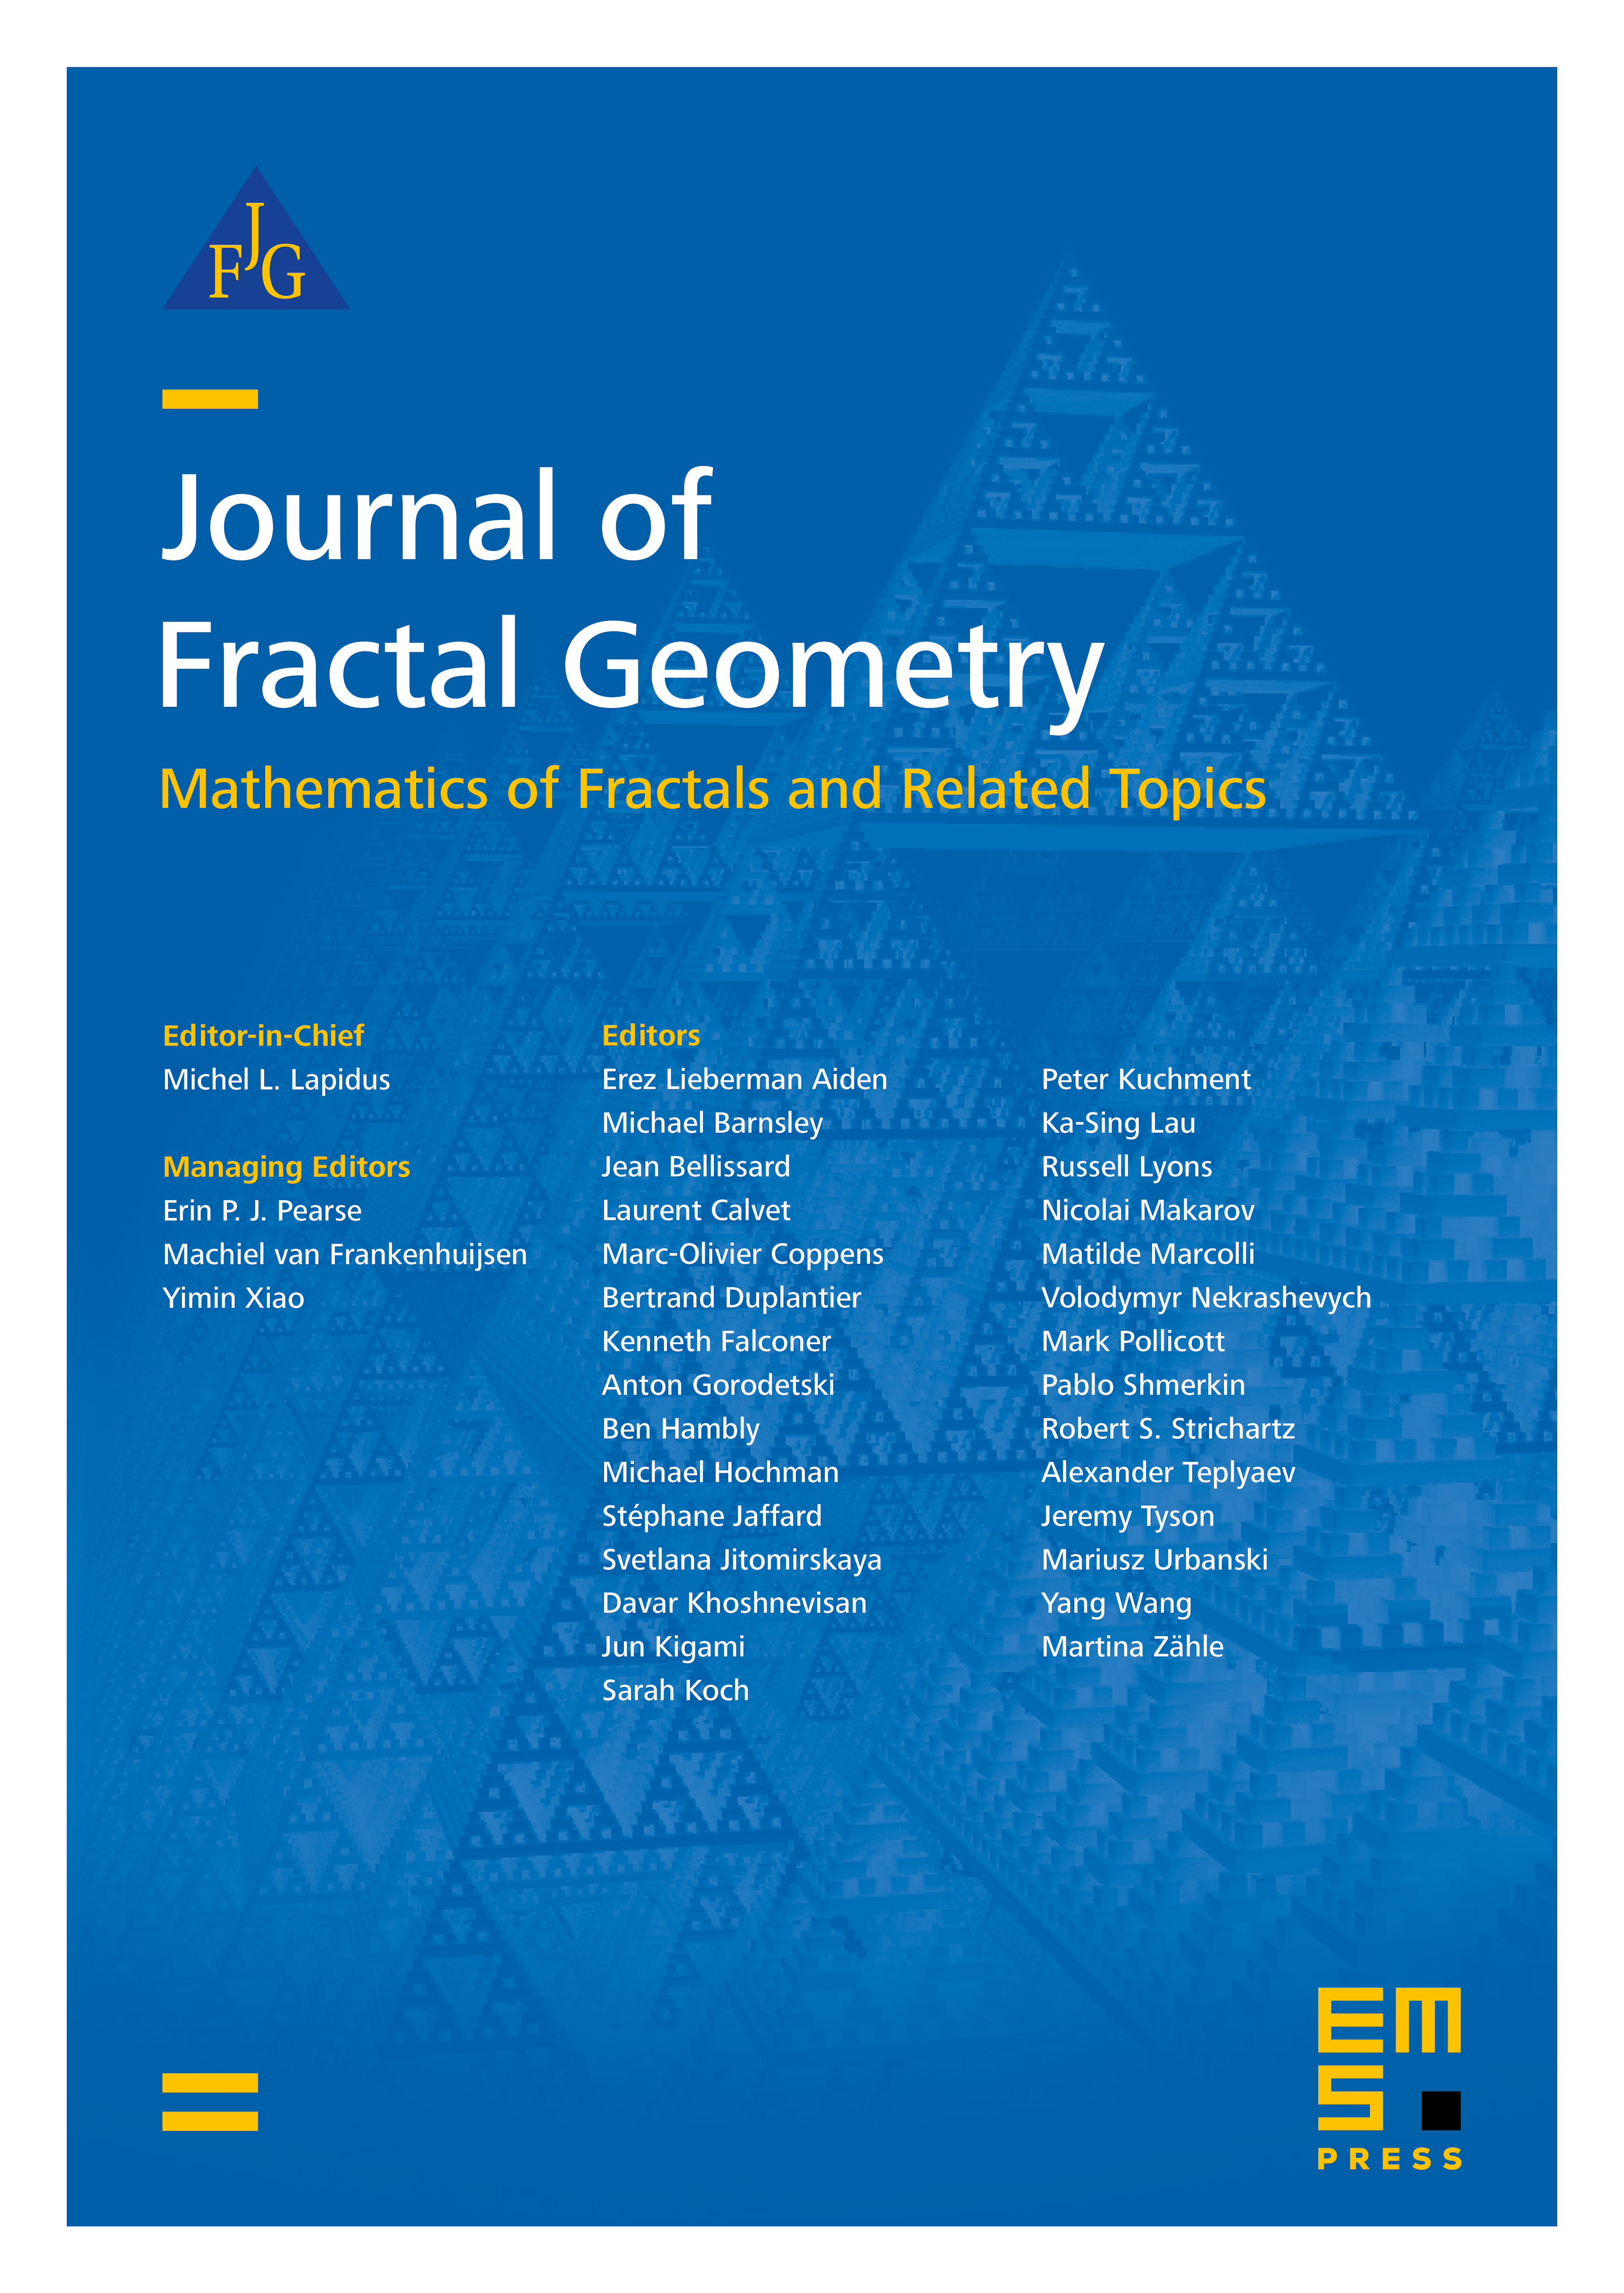 Non-spectral fractal measures with Fourier frames cover